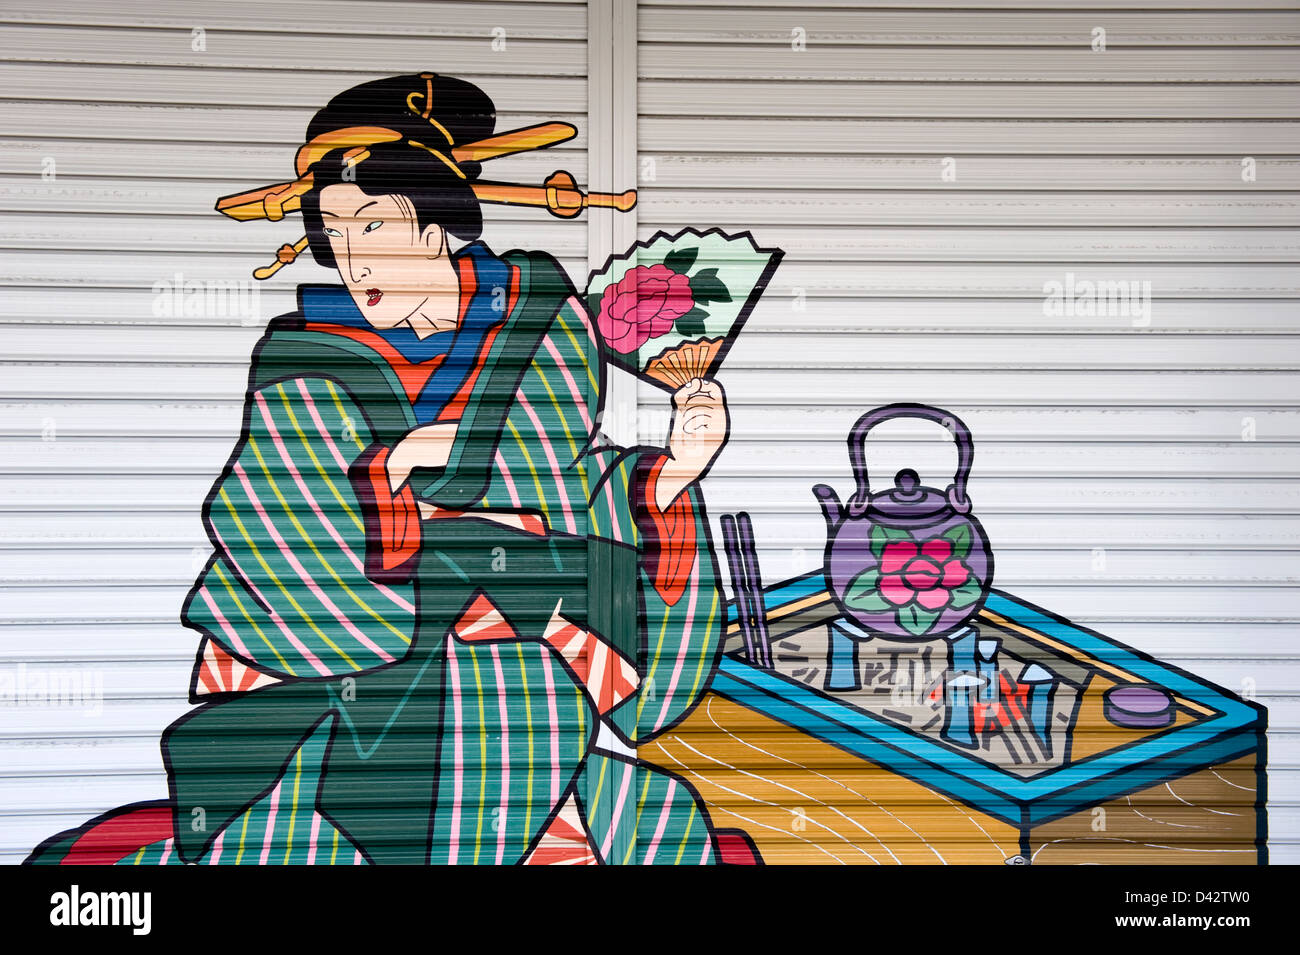 Traditional Ukiyo-e style painted artwork adorns a retail shop shutter in the old entertainment district of Asakusa, Tokyo. Stock Photo